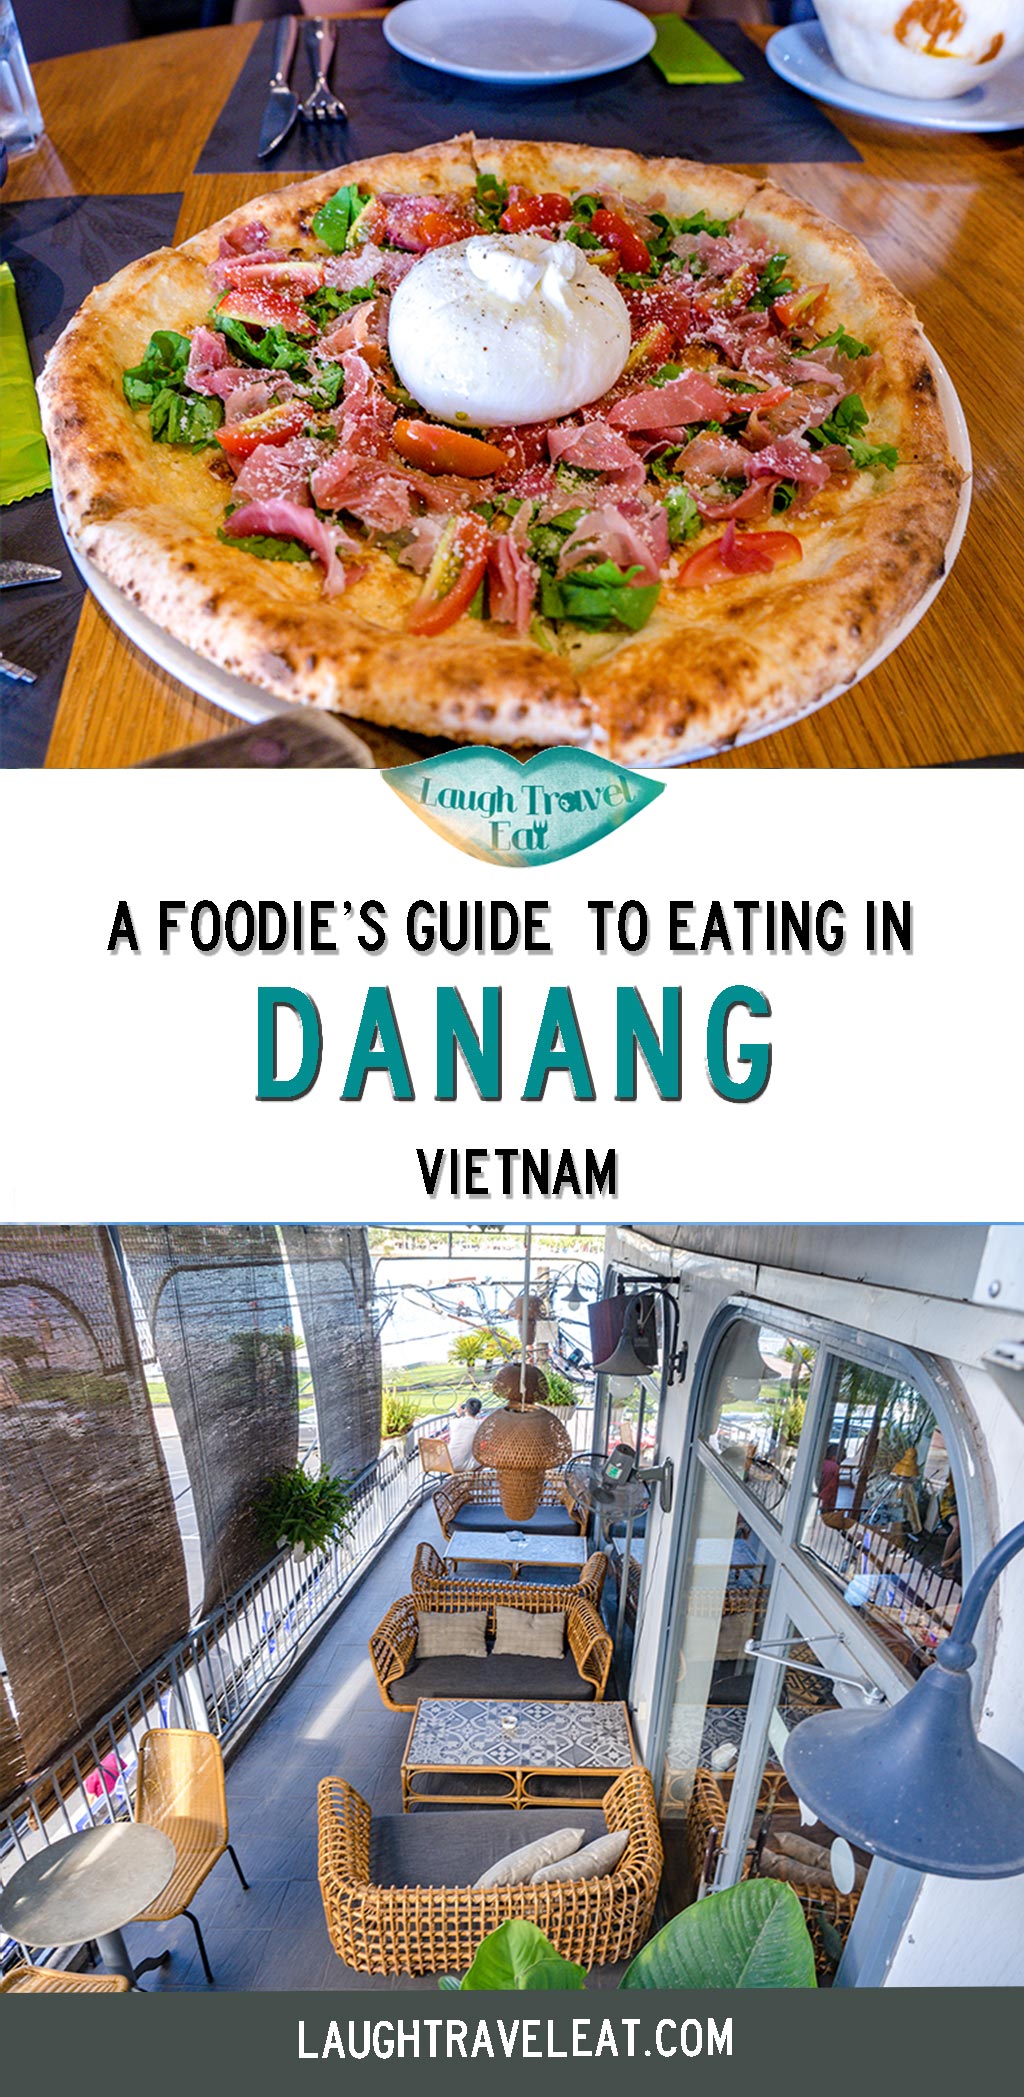 As one of the biggest cities in central Vietnam, it’s no question that there are plenty of restaurants and cuisine to try in Da nang. What I love about it is that not only does it have cool, modern international restaurants but you can still find cheaper-than-cheap local and street food. Here are some of my top picks: #Danang #Vietnam #Food